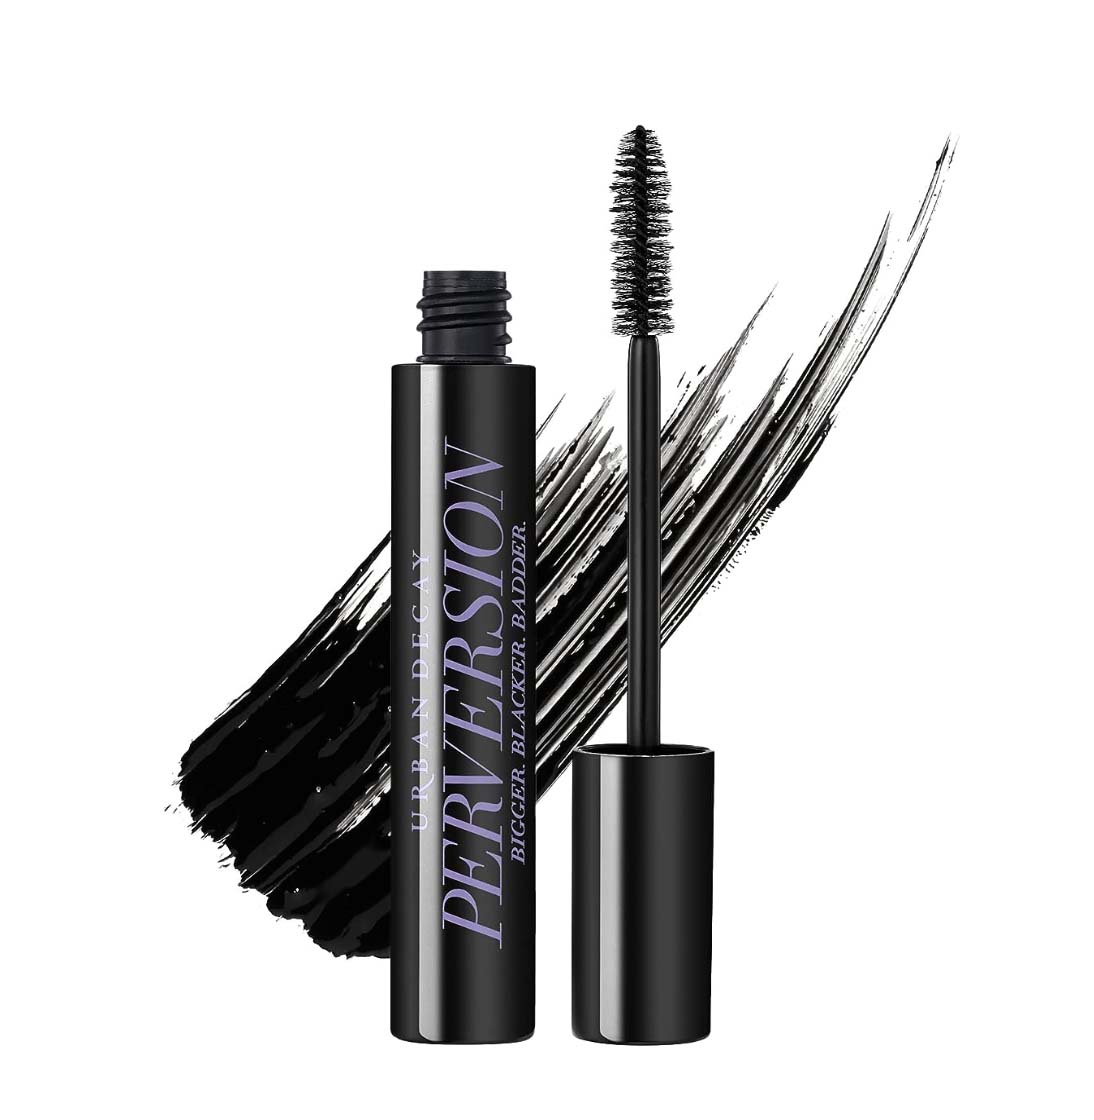 Black mascara in bottle with swatches